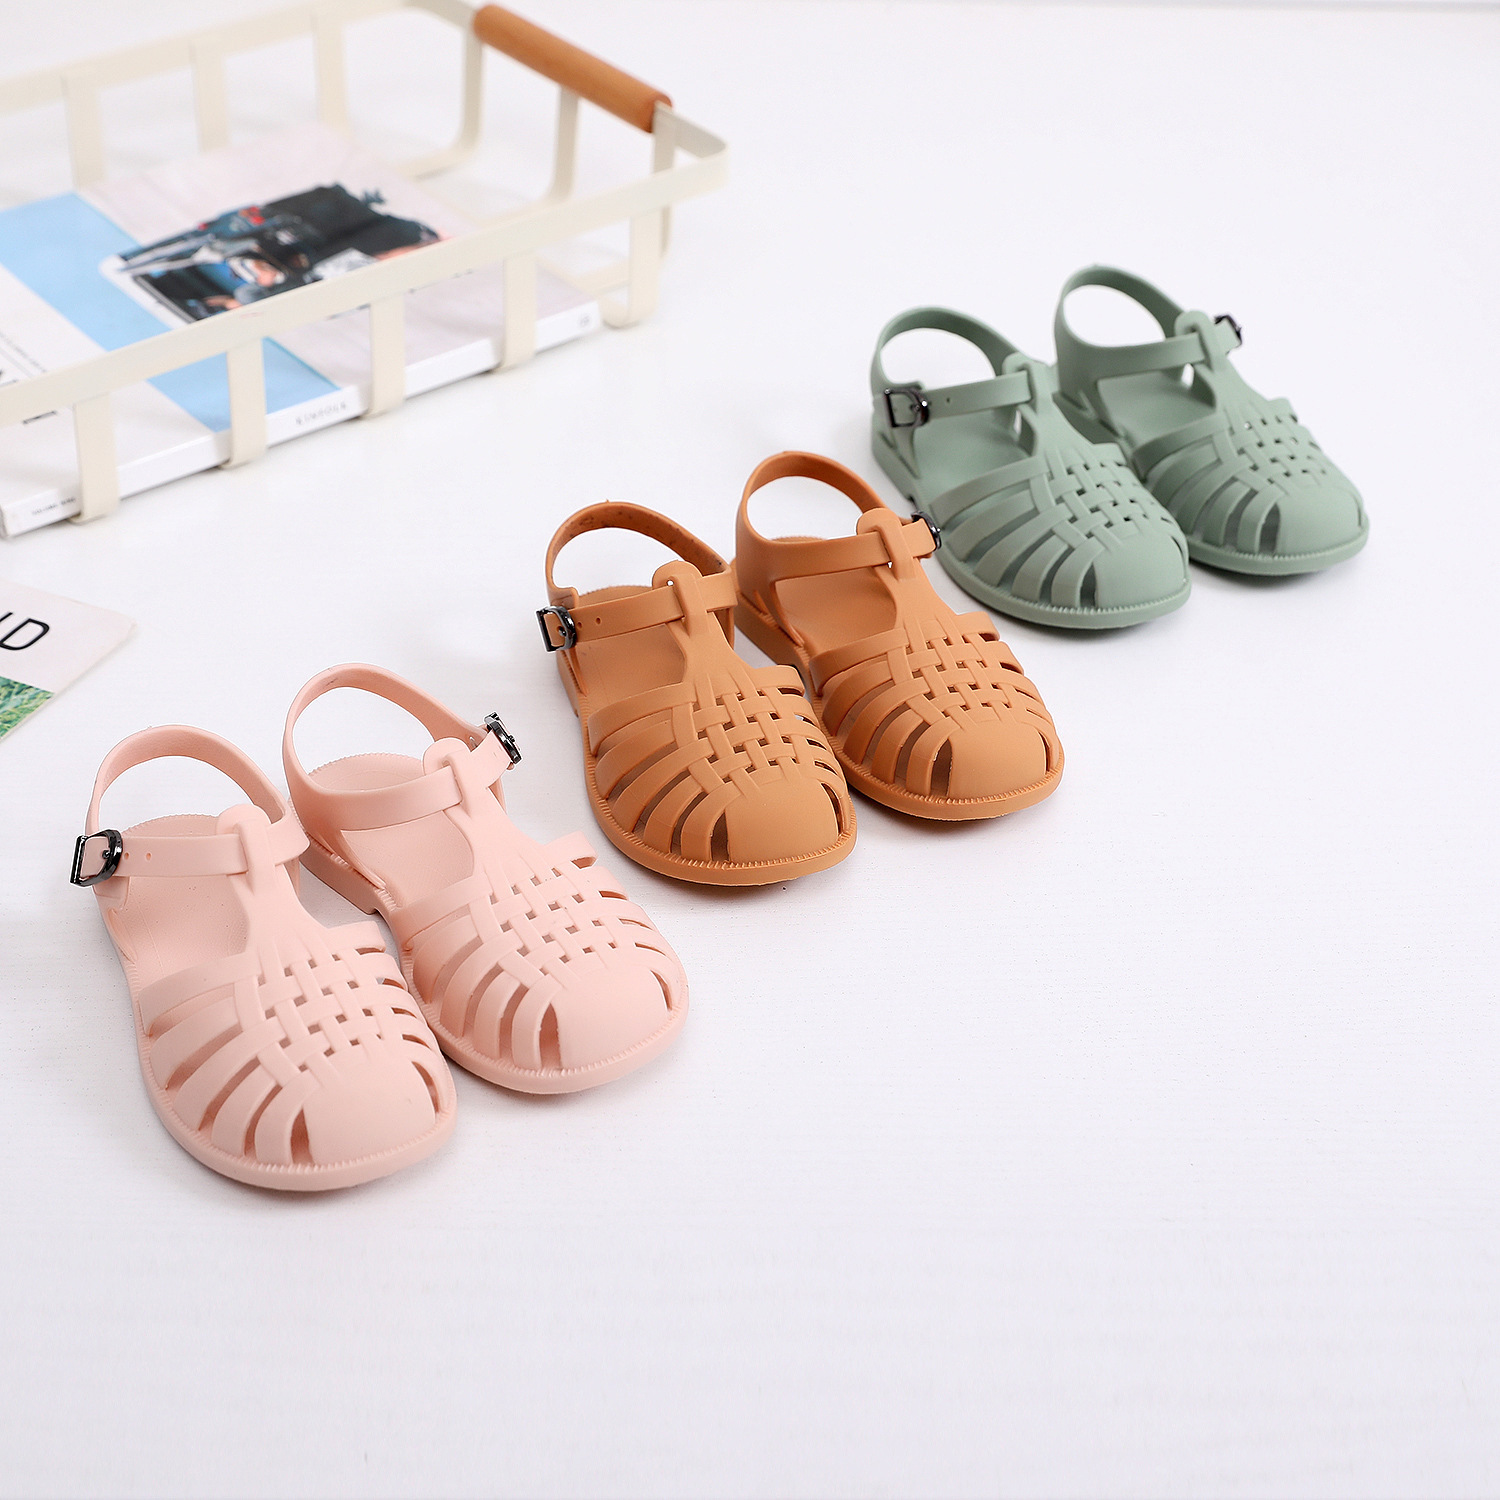 Summer children's plastic jelly hollow closed toe sandals new baby neutral non-slip Roman Beach princess shoes